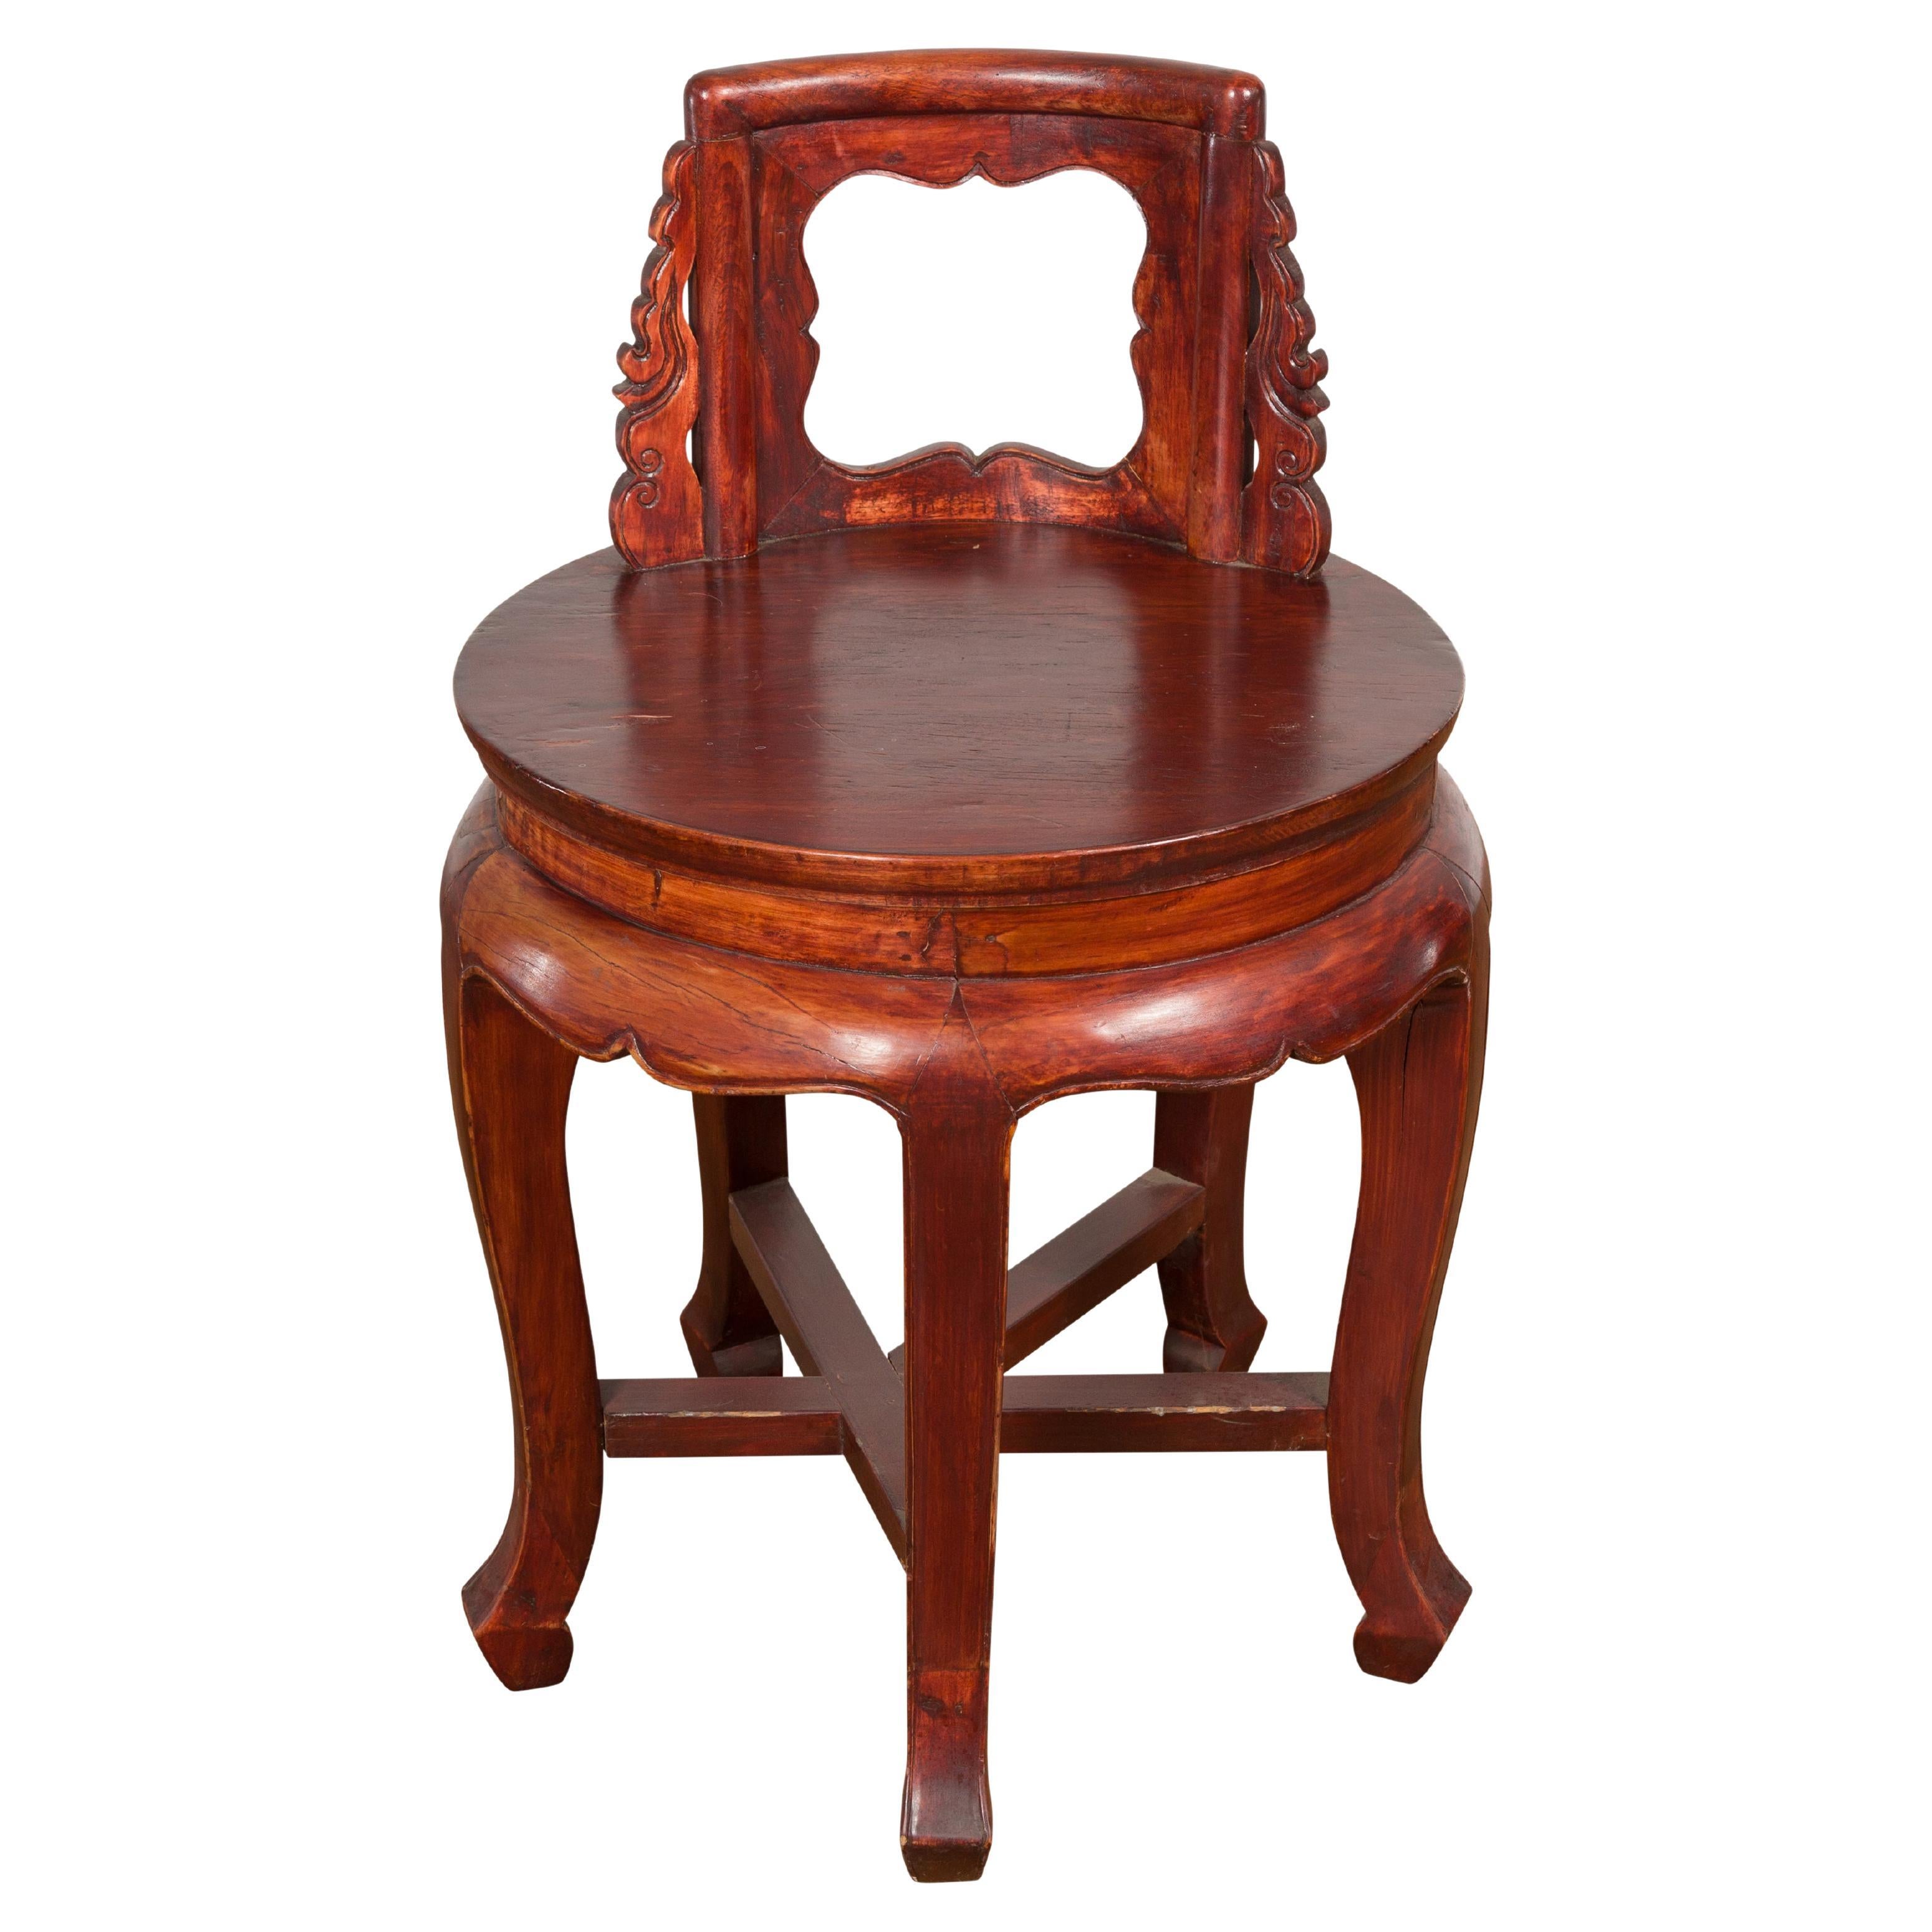 Chinese Late Qing Dynasty Diminutive Chair with Carved Back and Curving Legs